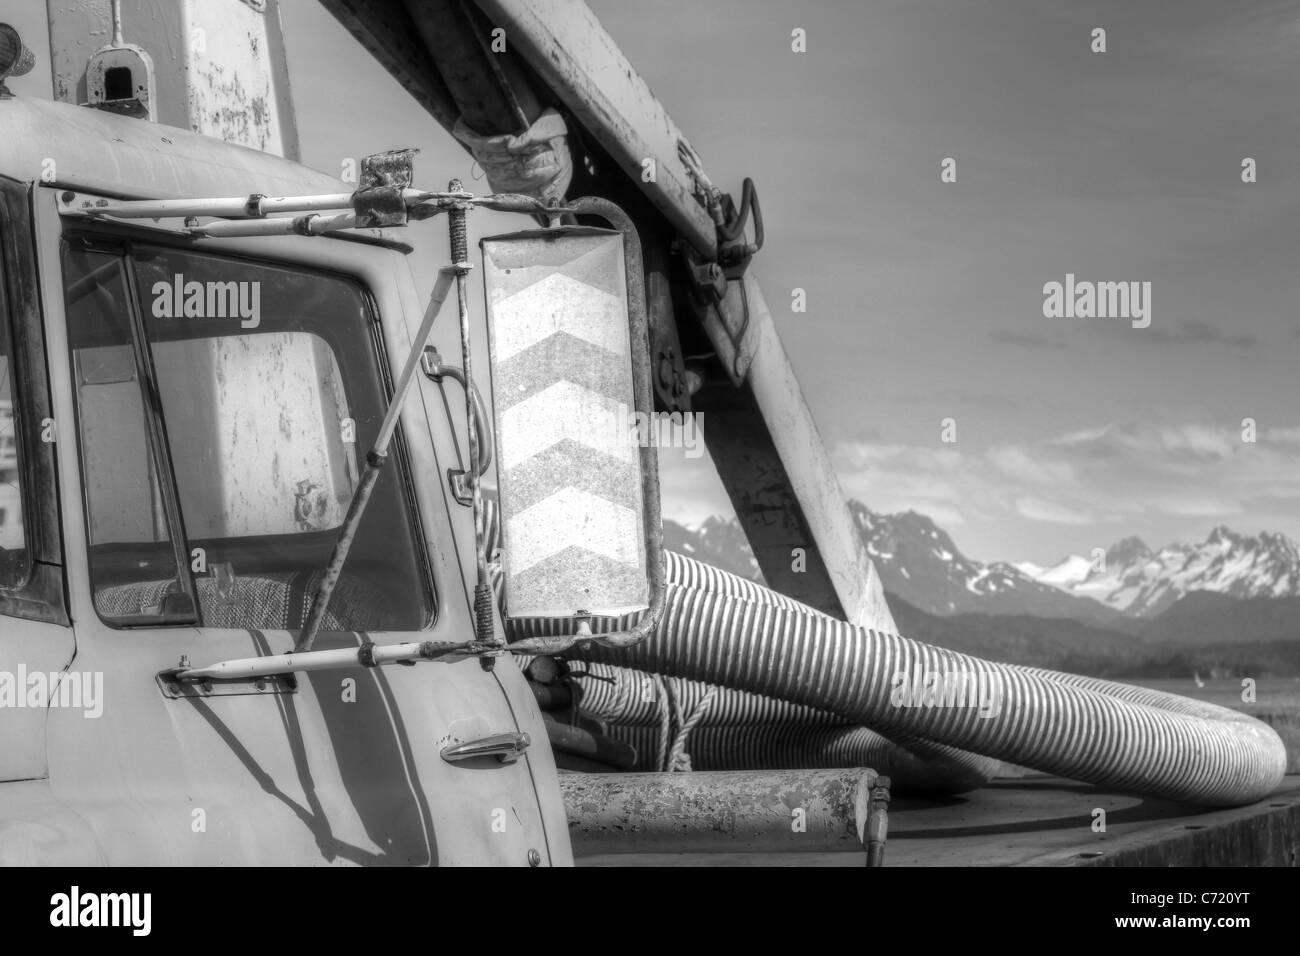 Crop of an old work truck in Alaska with mountains in the background, black and white. Stock Photo